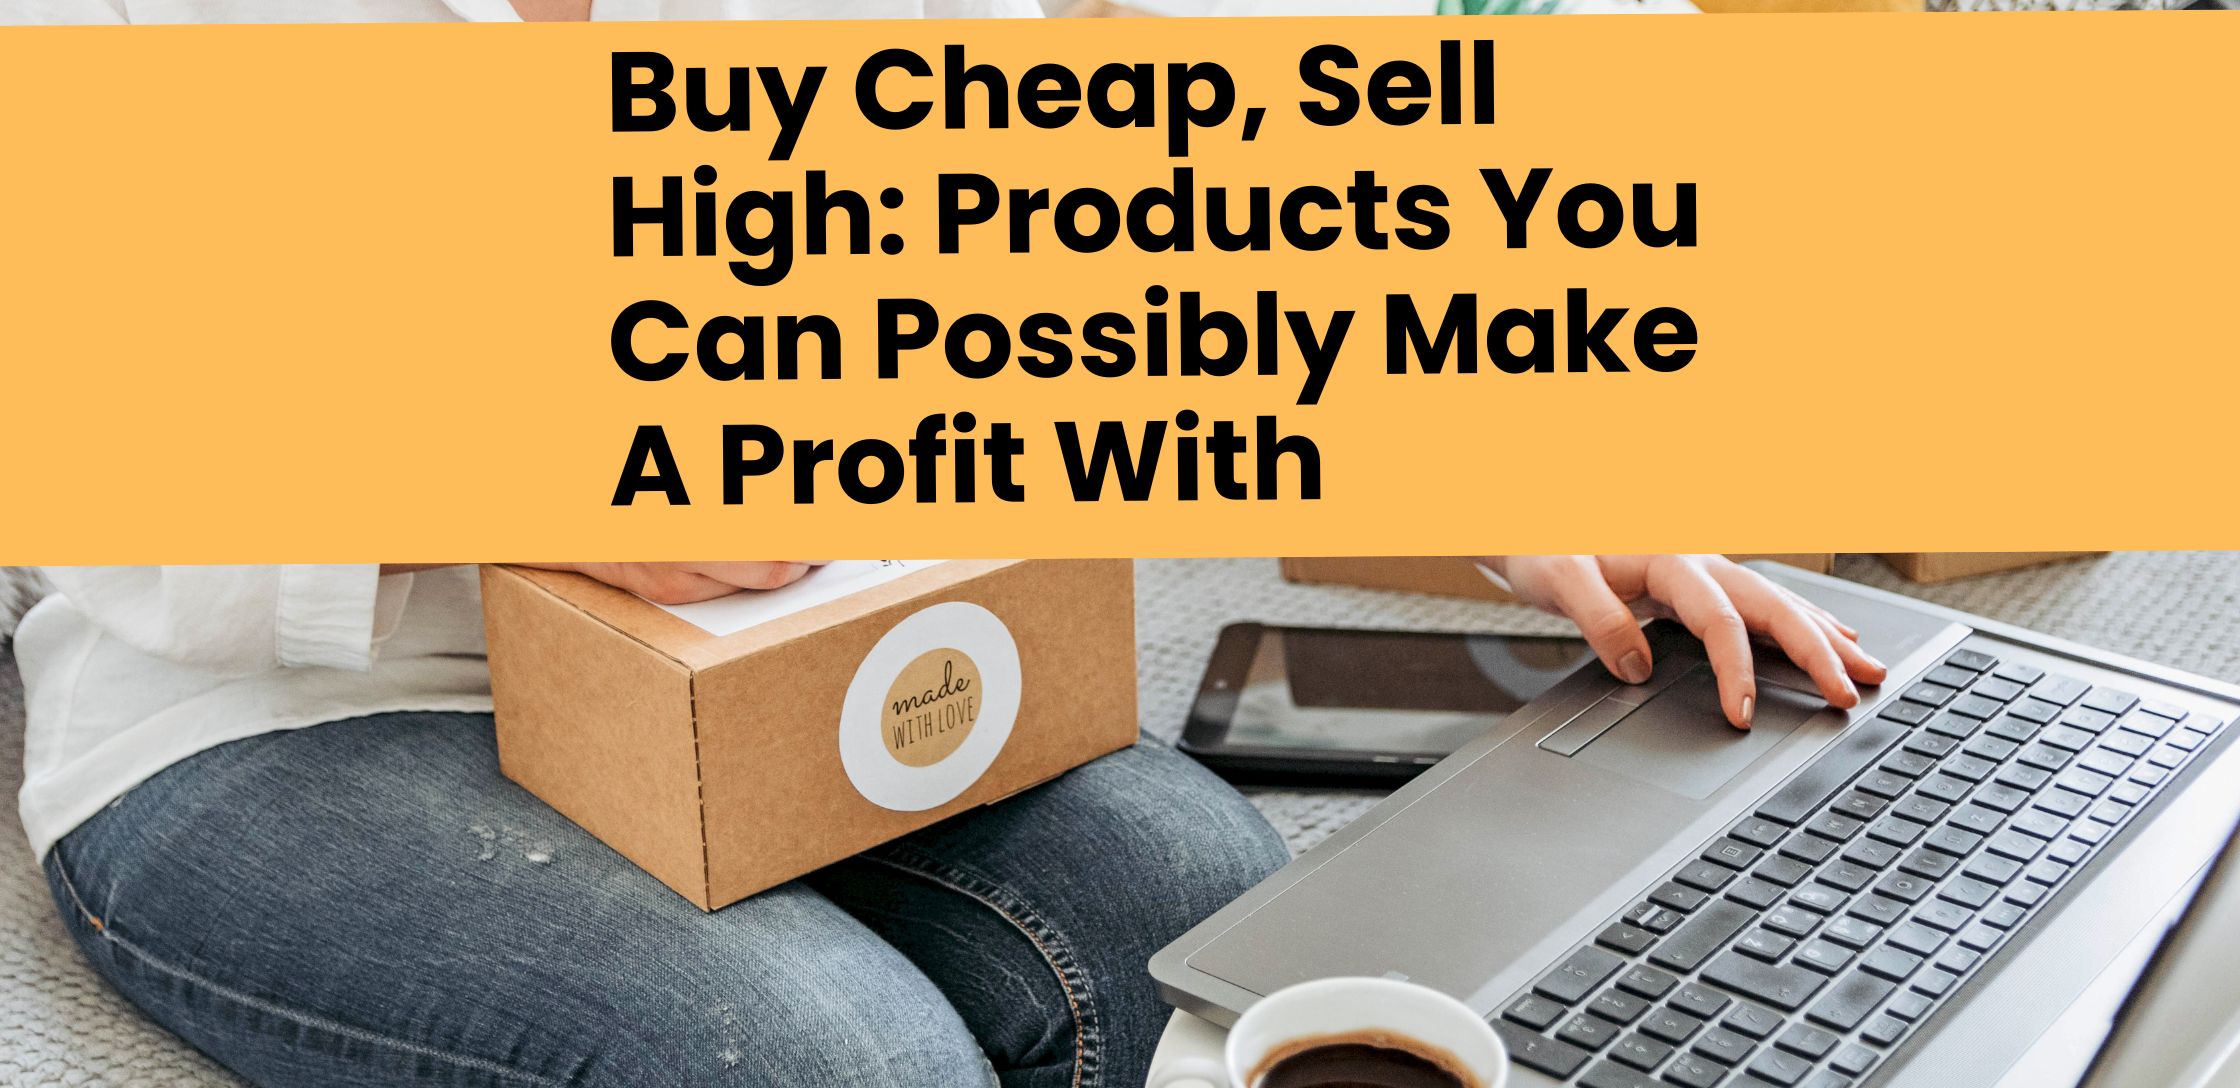 7 Low-cost, High-profit Products to Sell Online in 